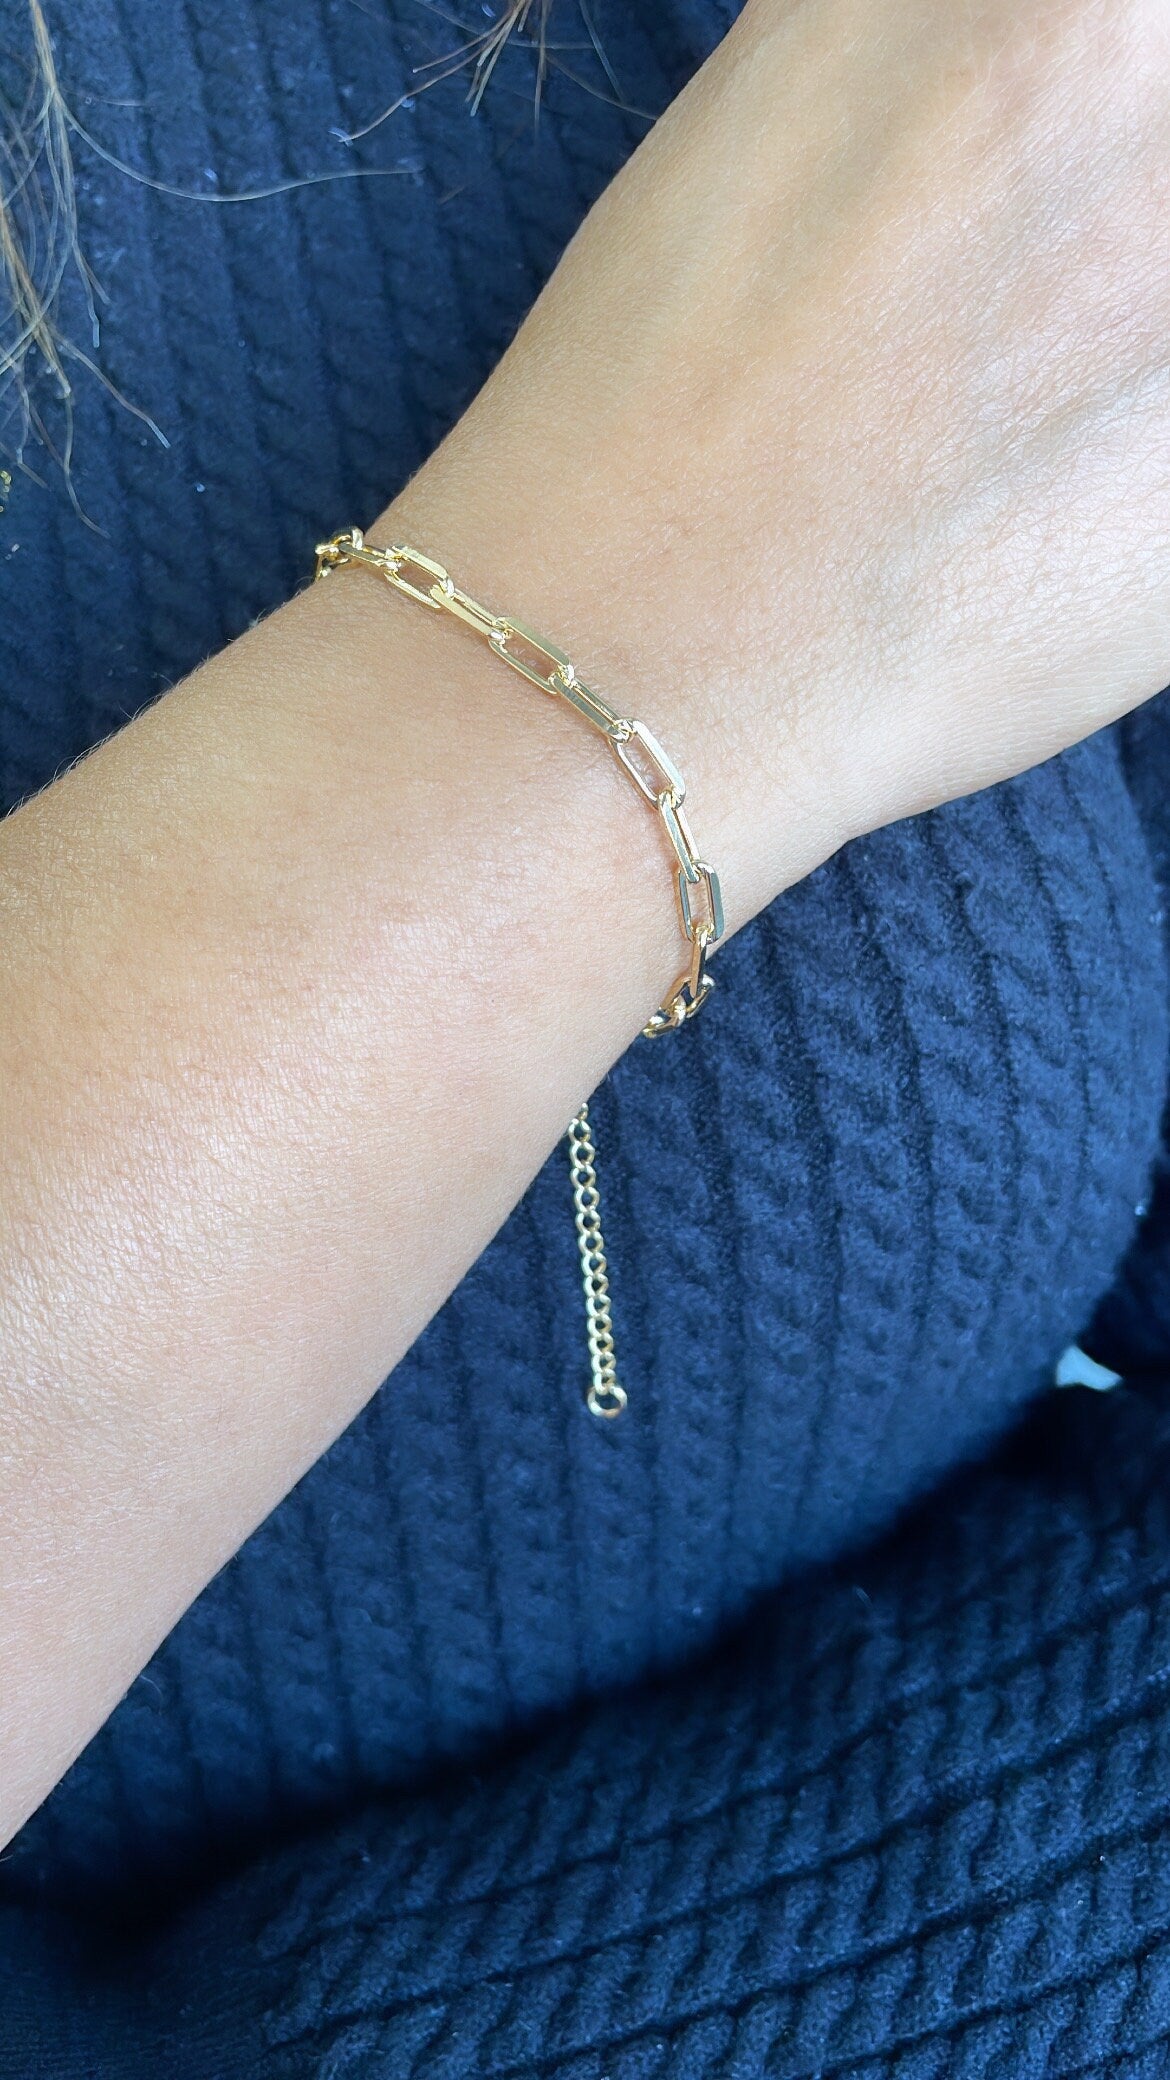 18k Gold Filled Dainty Smooth Paperclip Bracelet Availbe in 3 Sizes